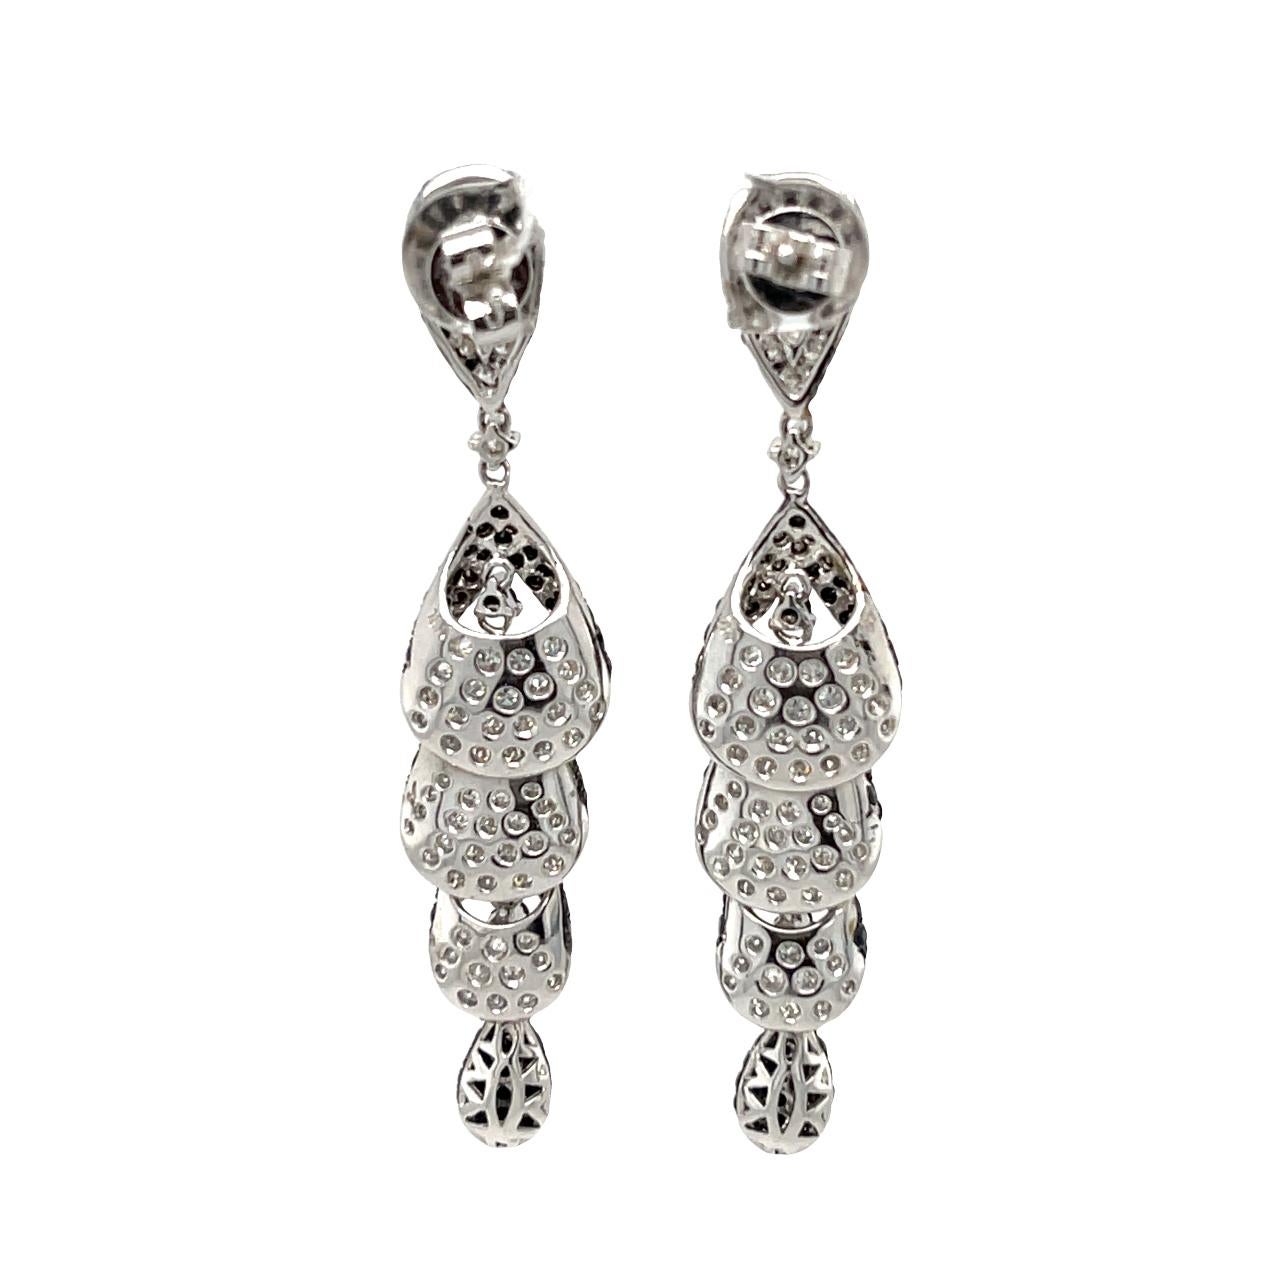 These stunning dangling earrings are surrounded with 272 Black Diamonds and 136 brilliant cut round White Diamonds and set in 18K white gold. These earrings are 2.25 inches in length and will be the talk of the event! They have double lock closure